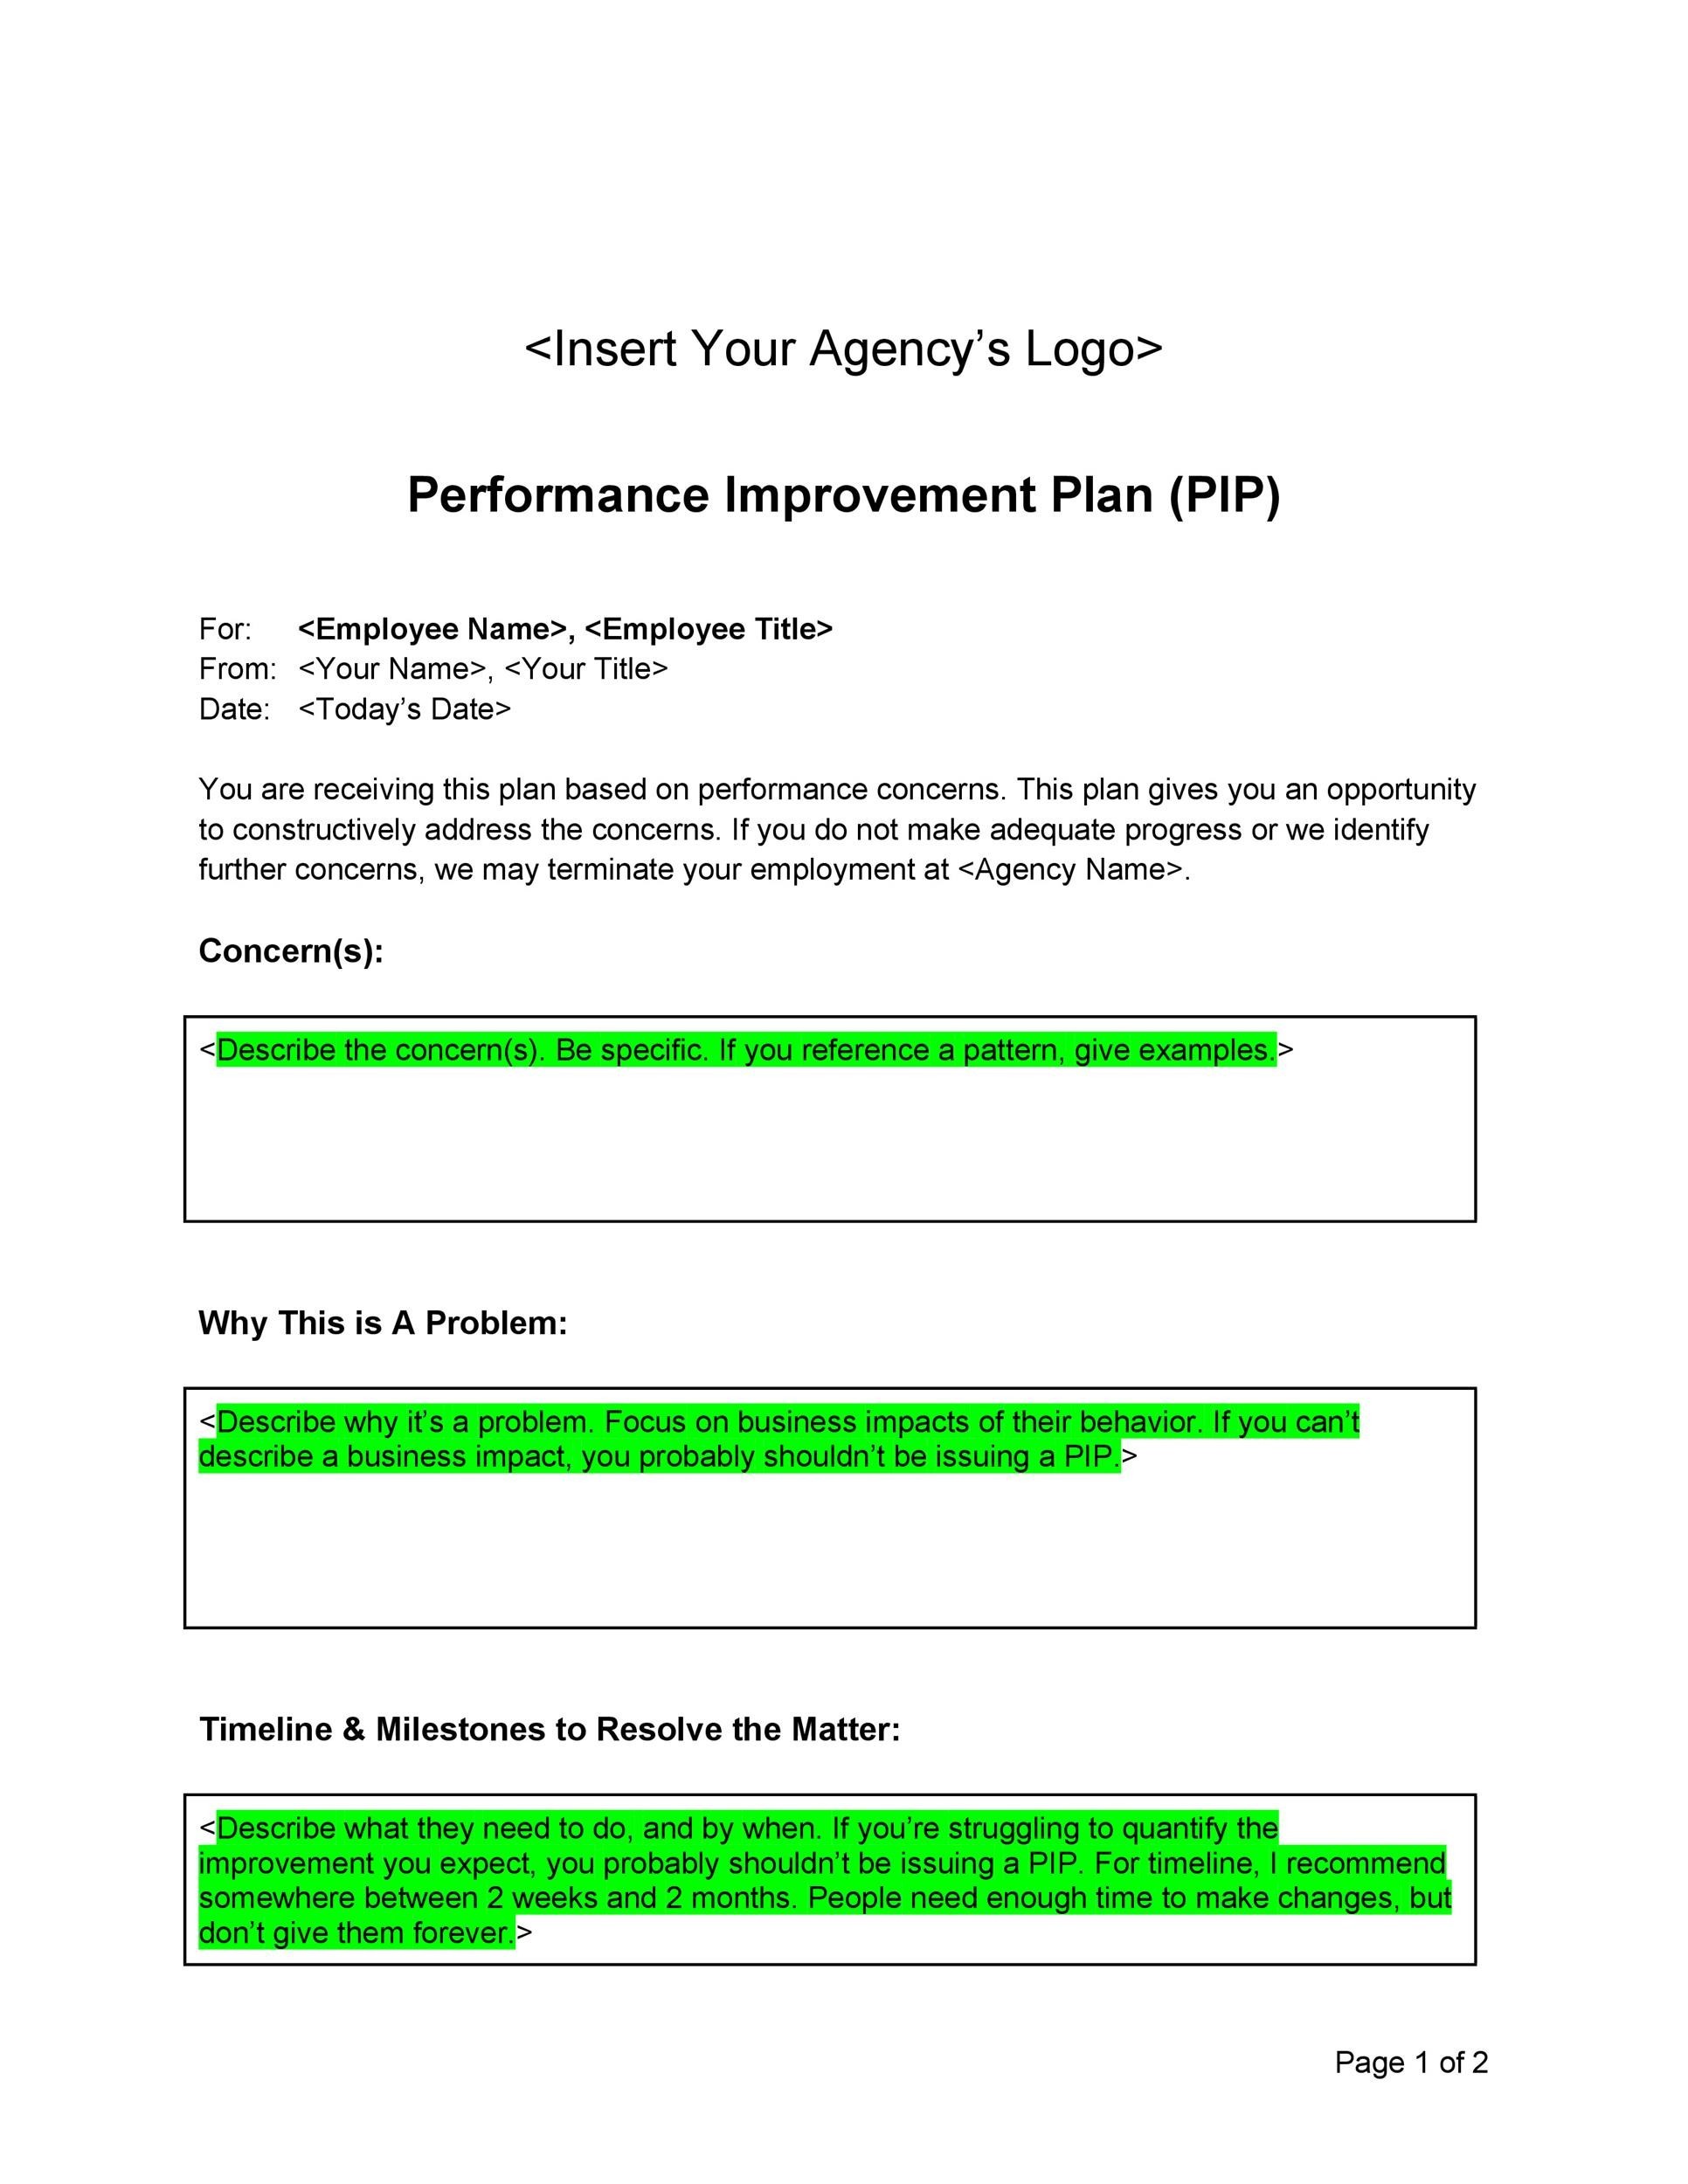 40 Performance Improvement Plan Templates And Examples 0861